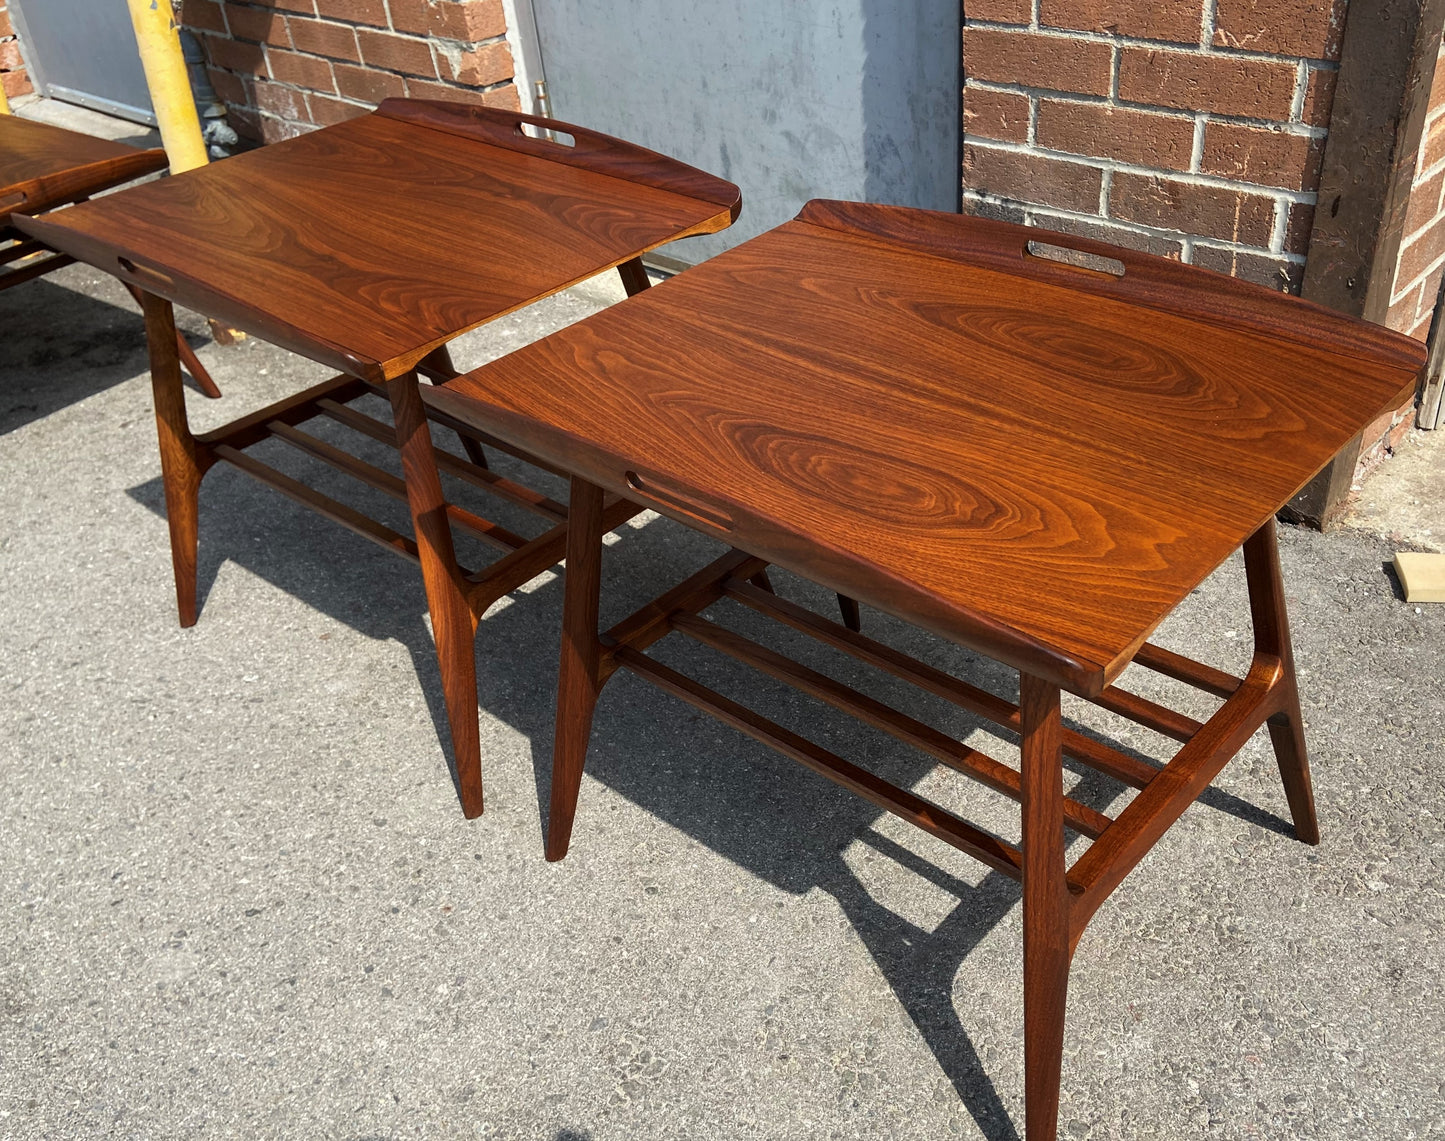 2 REFINISHED Mid Century Modern Walnut tray- style end tables, Perfect